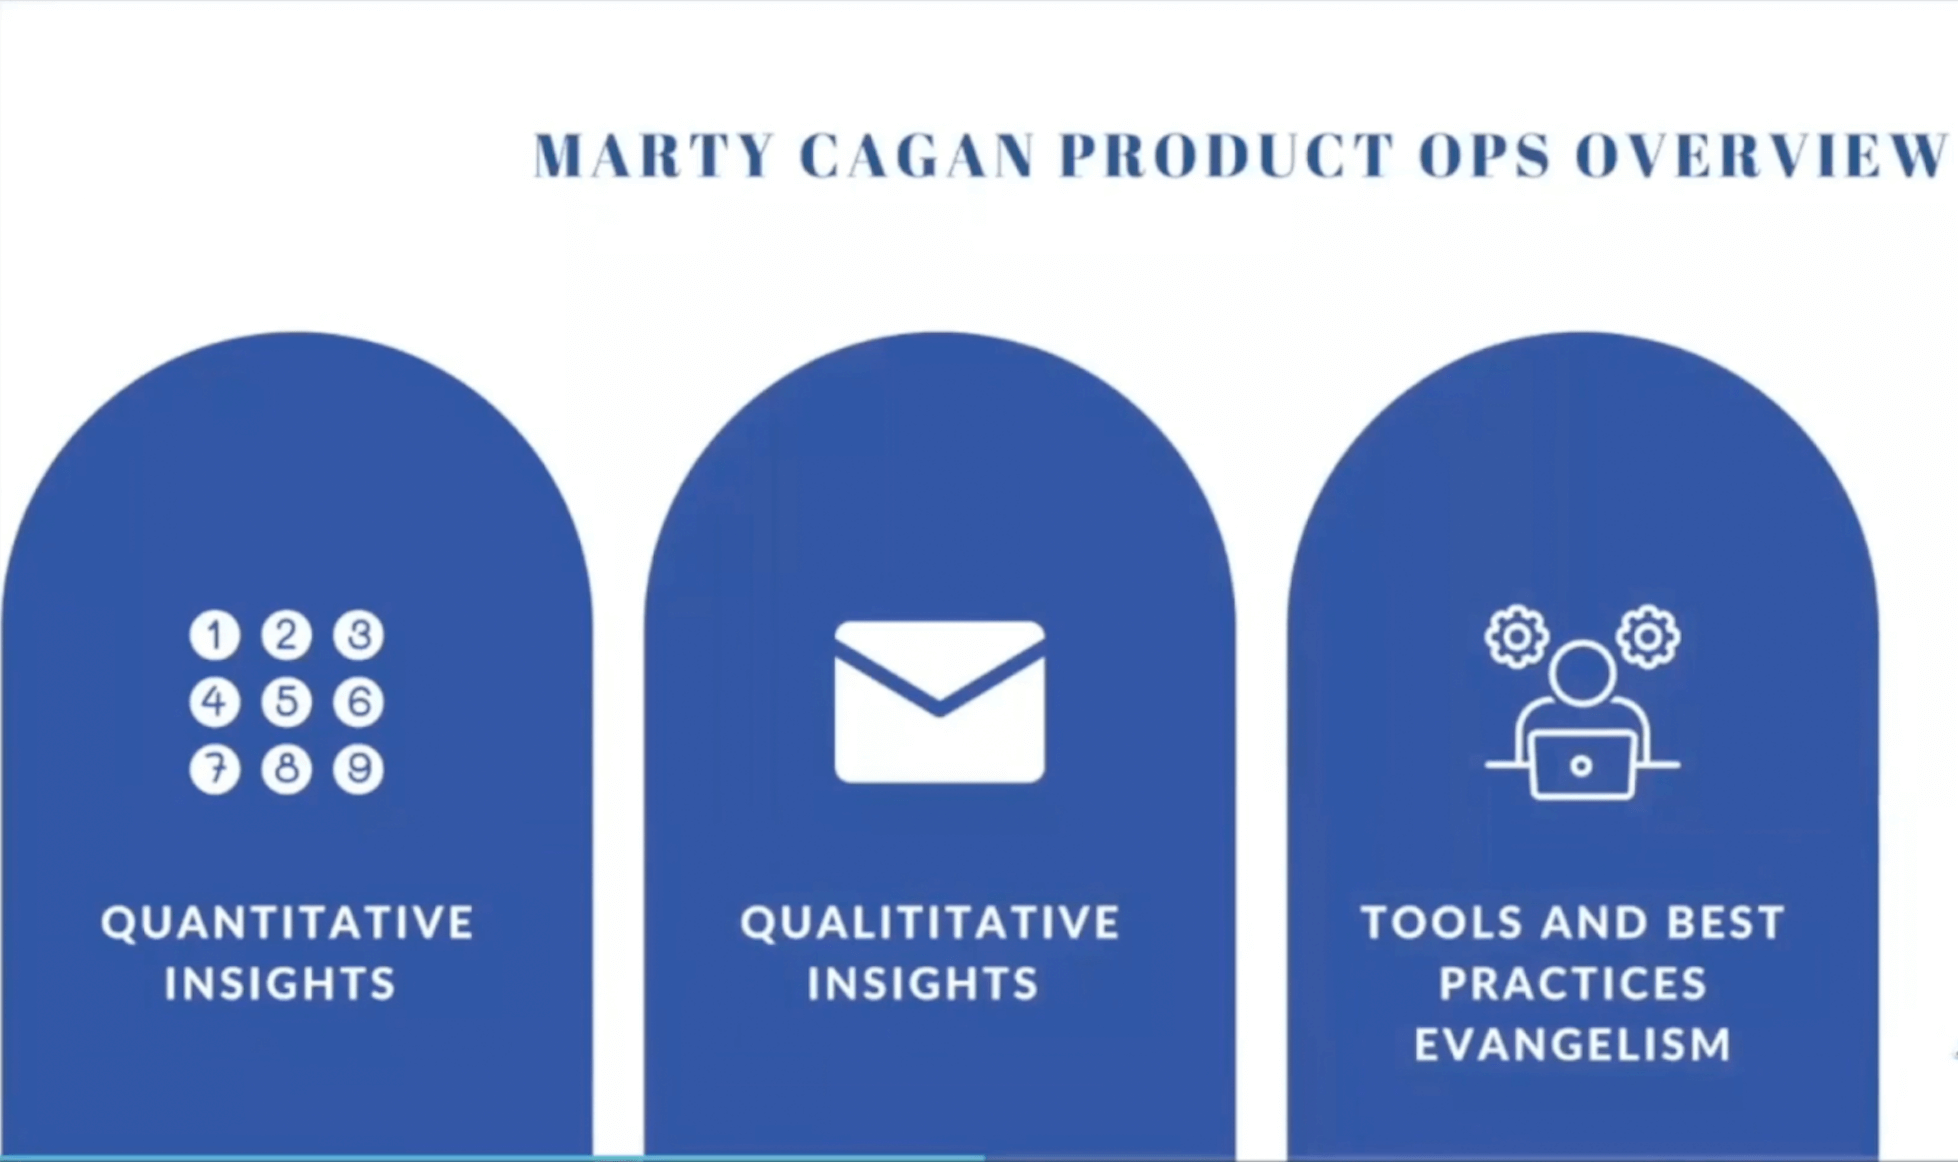 Marty Cagan Product Ops Overview